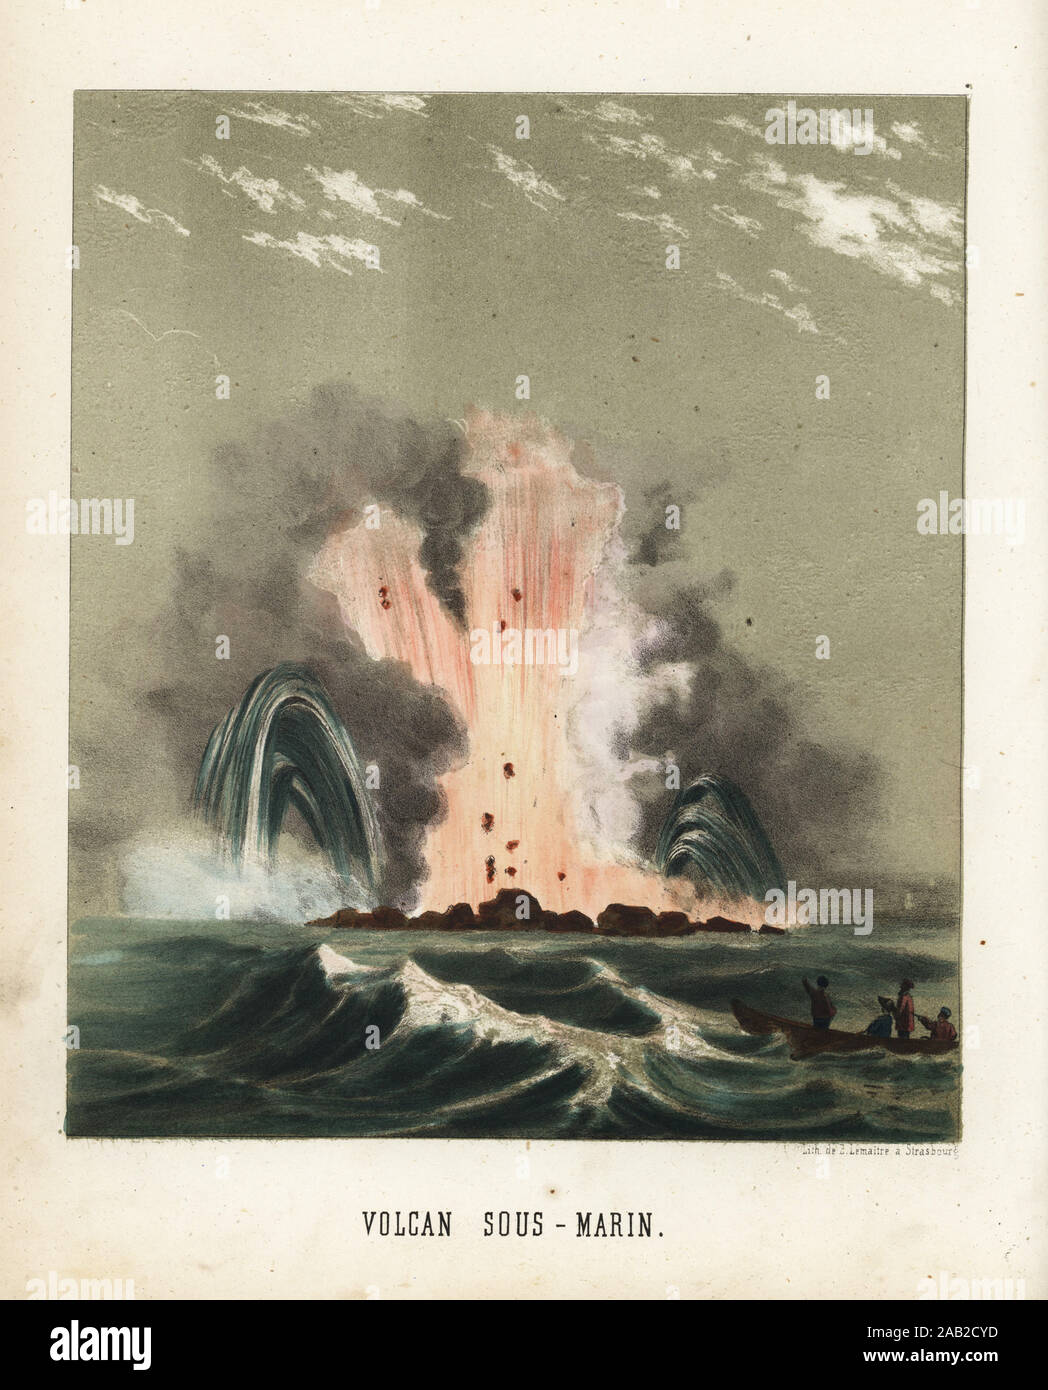 Submarine volcanic eruption. Tourists in rowboats watching an explosive eruption. Volcan sous-marin. Handcolored lithograph by Emile Lemaitre from Munerelle’s Les Phenomenes et Curiosites de la Nature (Natural Phenomena and Curiosities), Libraire Derivaux, Strasbourg, 1856. Stock Photo